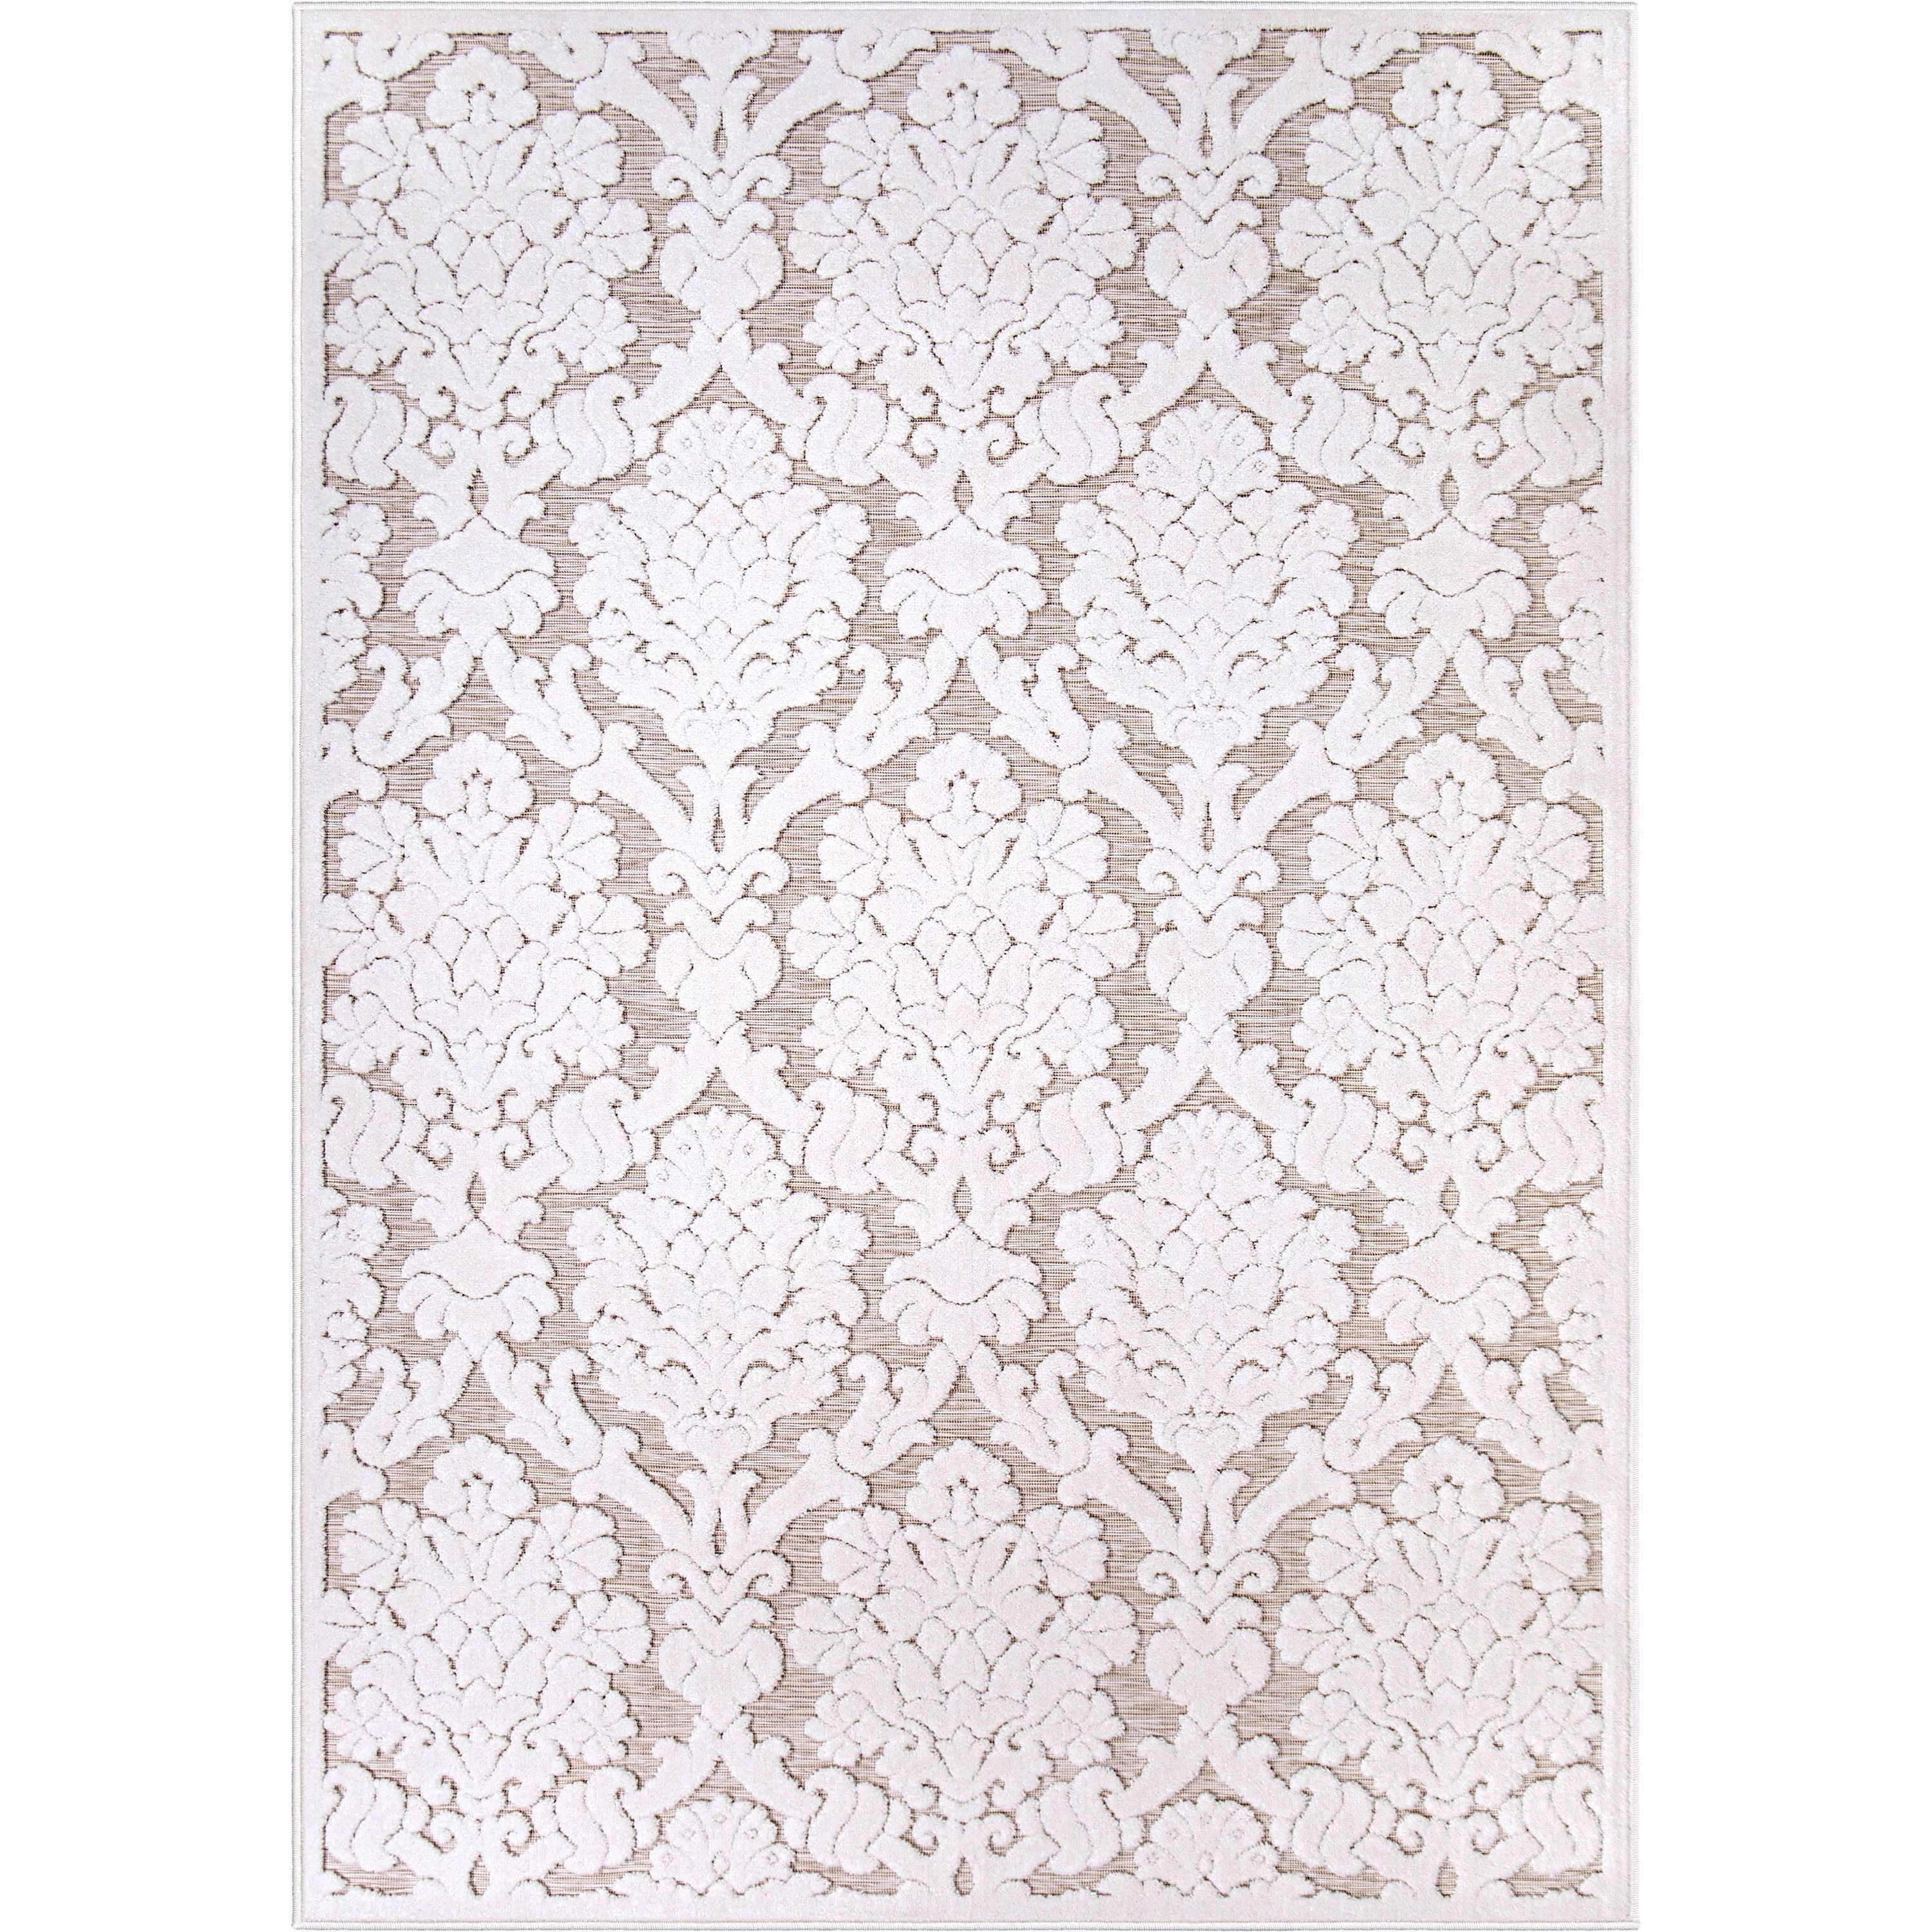 My Texas House Charlotte, Transitional, Damask, Woven Indoor/ Outdoor Area Rug, Natural Driftwood... | Walmart (US)